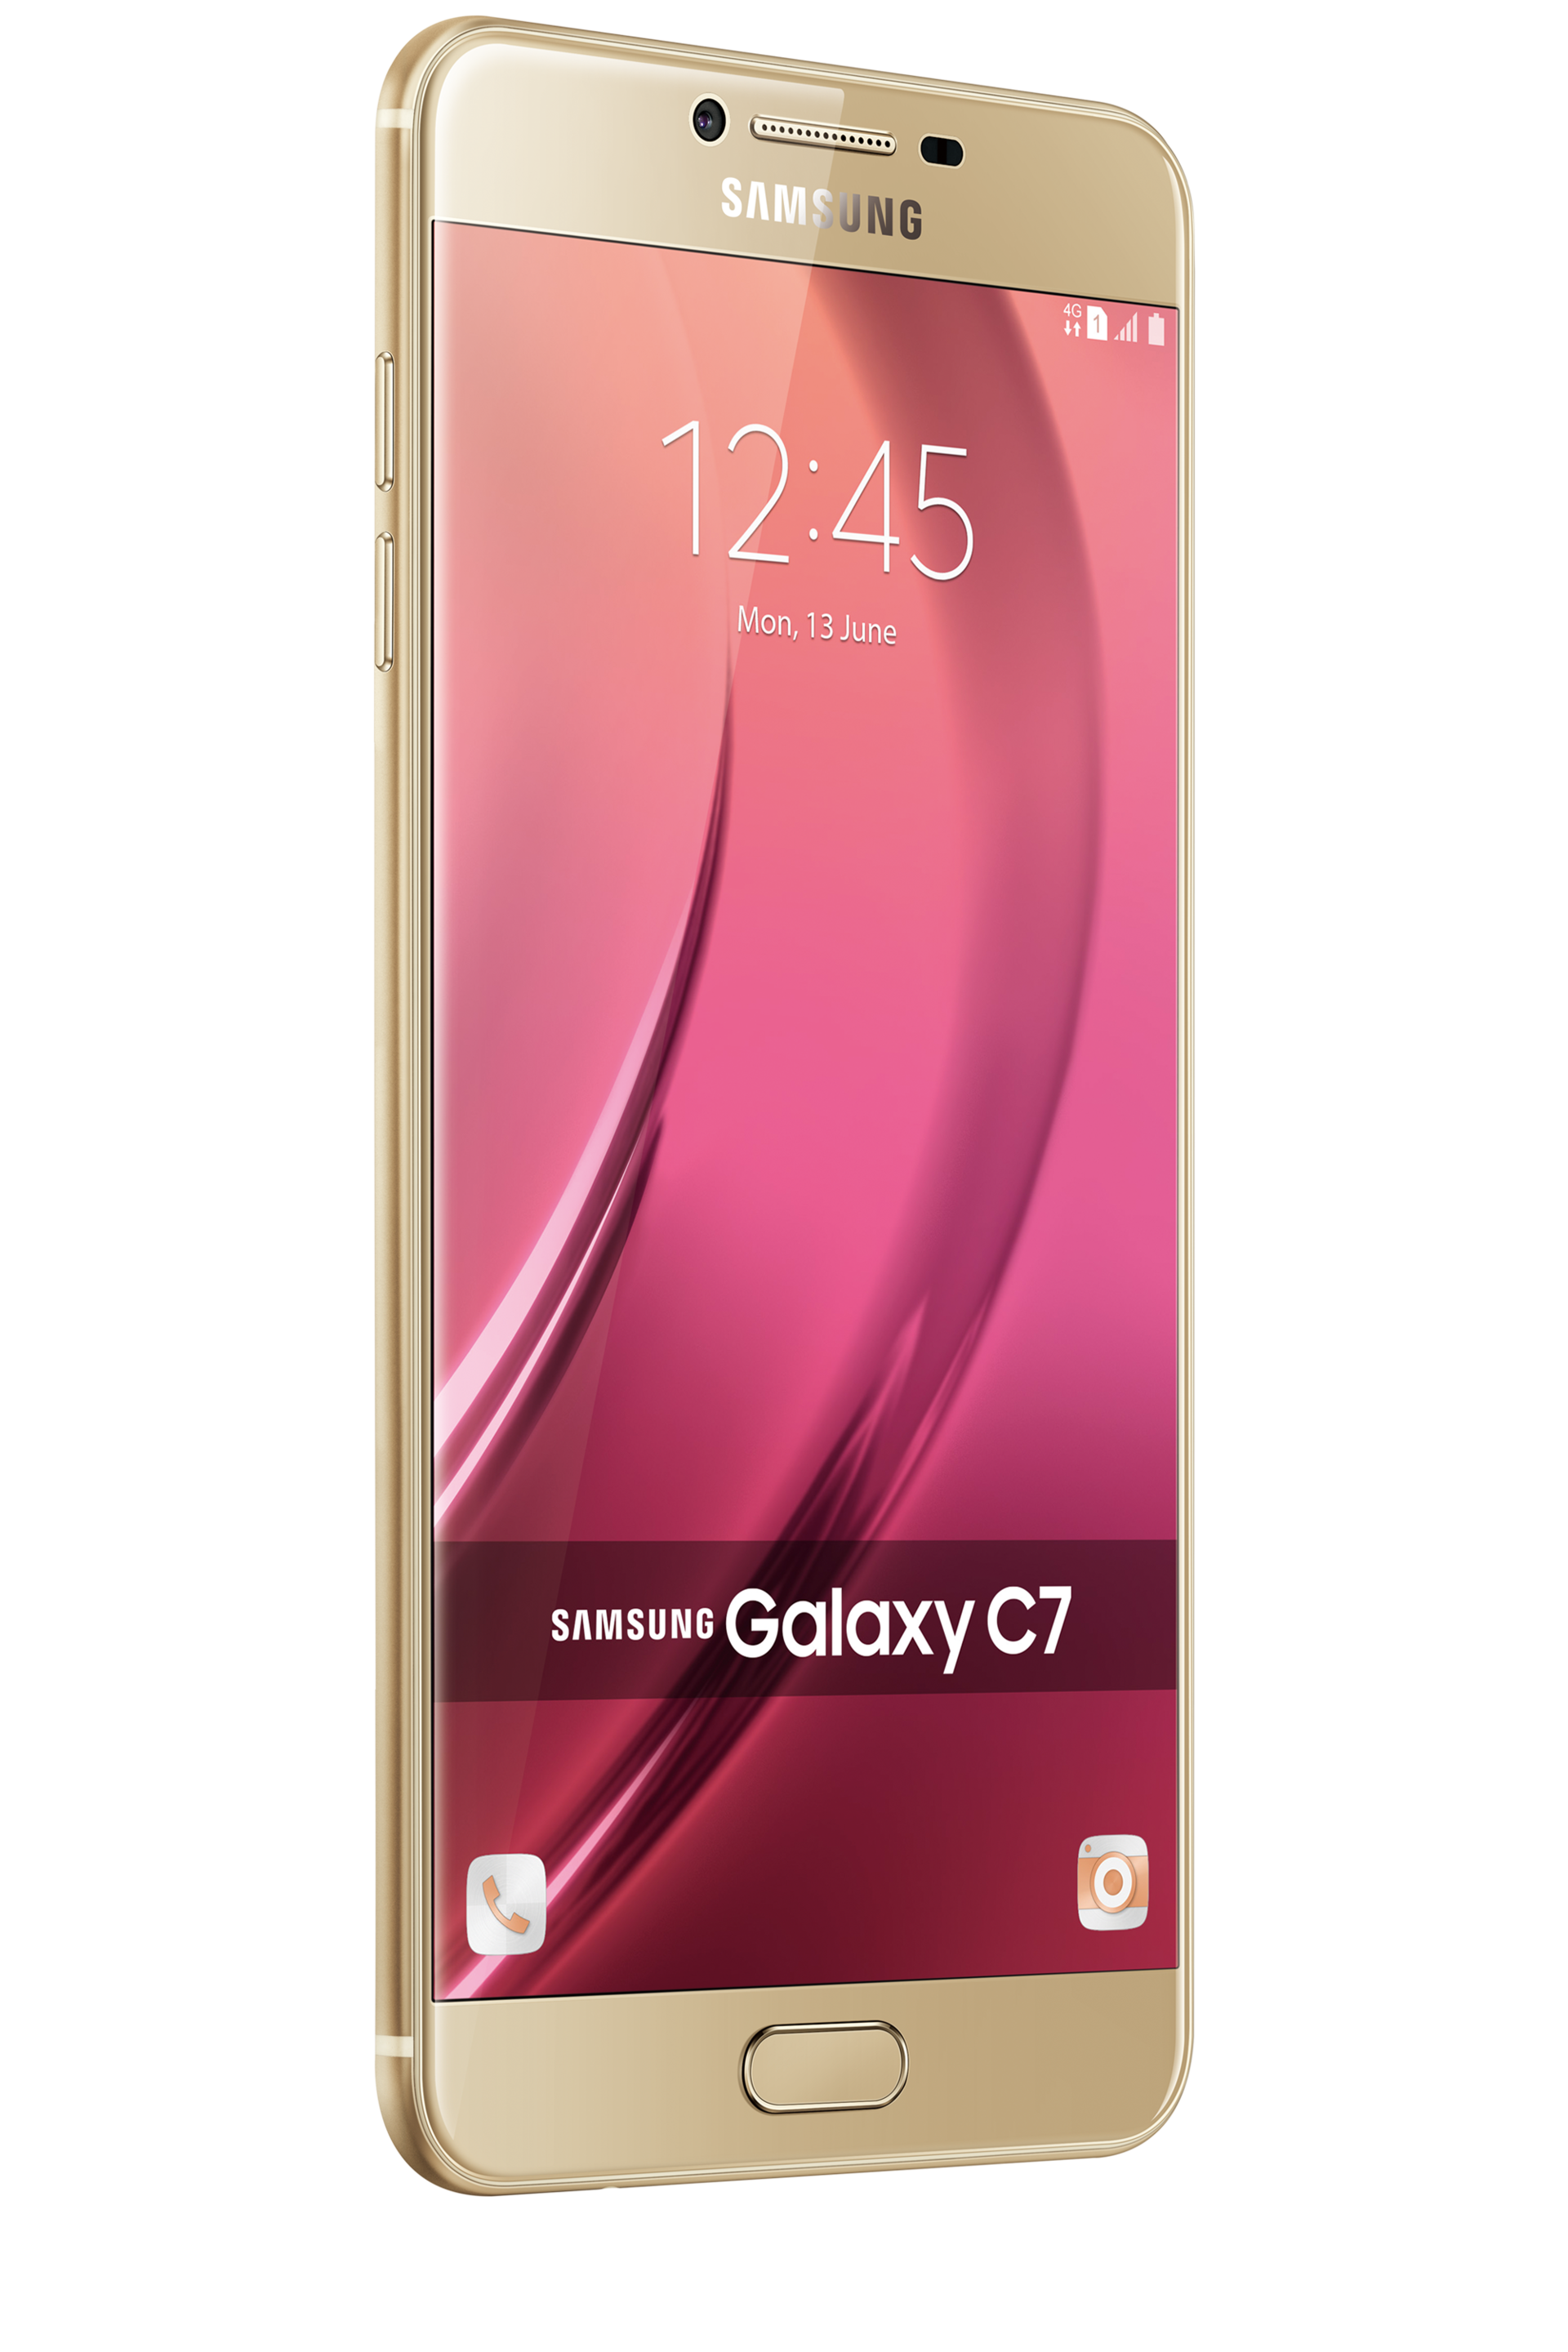 http://images.samsung.com/is/image/samsung/hk_en-galaxy-c7-sm-c7000zdetgy-002-gold-gold?$PD_GALLERY_JPG$